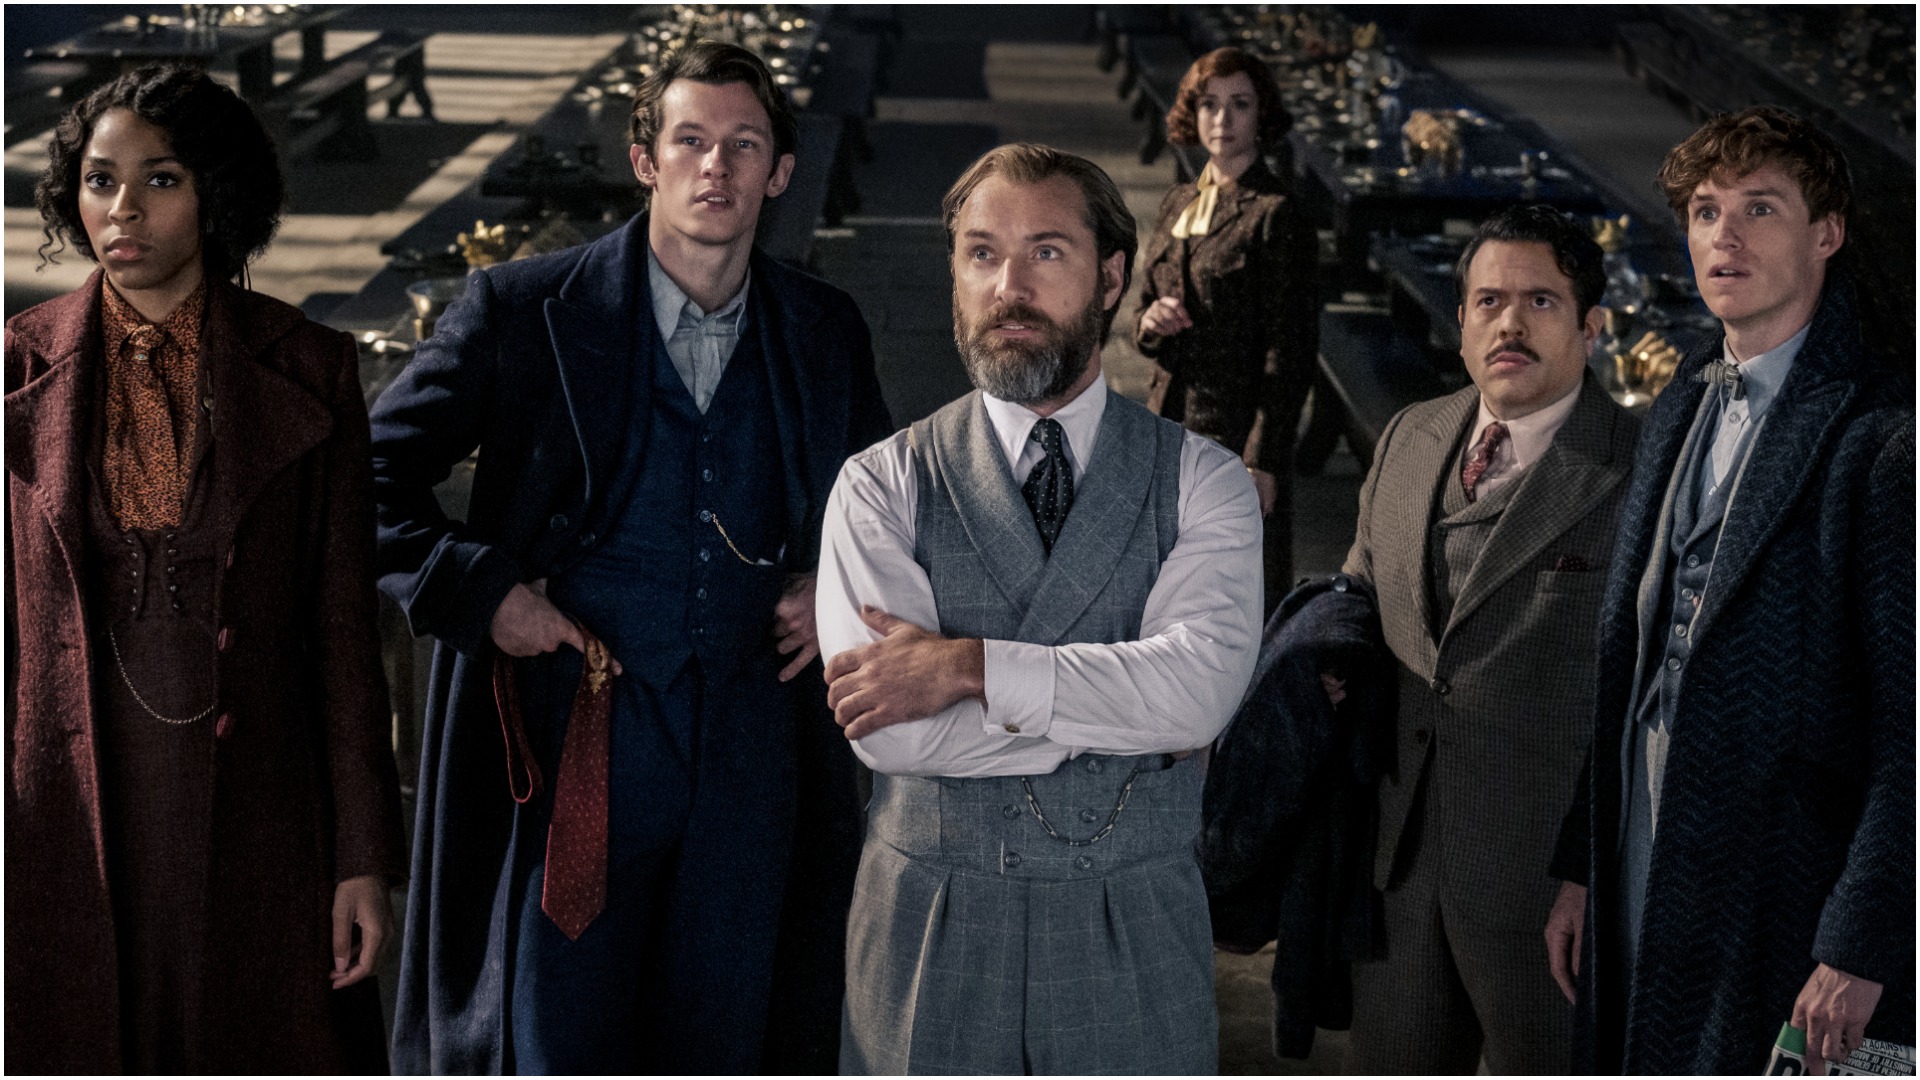 Fantastic Beasts 4 remains unconfirmed as Warner Bros. waits on Secrets of Dumbledore’s box-office numbers